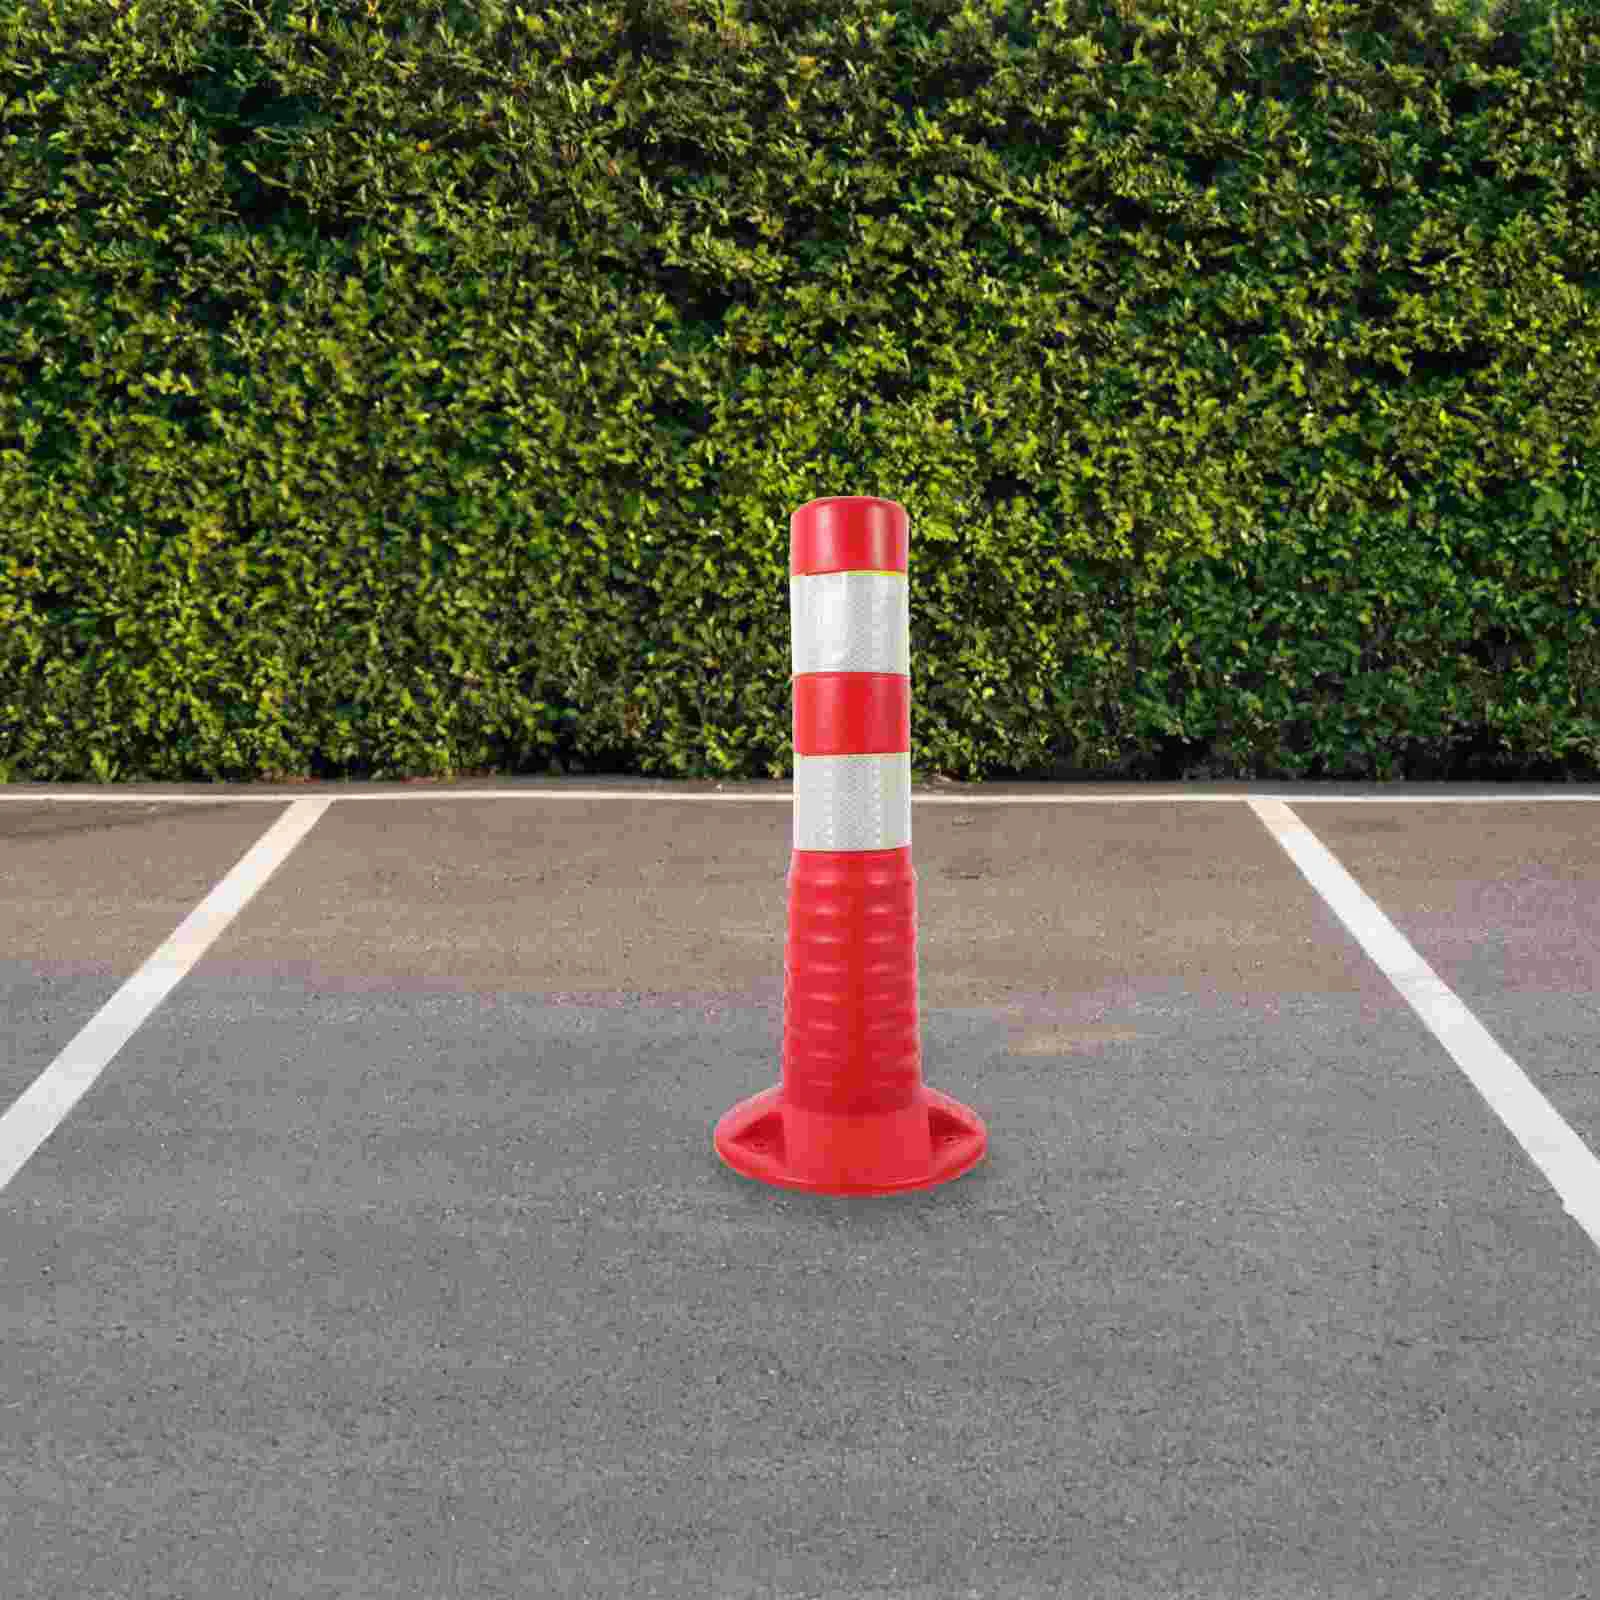 

Crash Column Reflective Traffic Guardrail Anti-collision Supplies Road Barricade Cone Movable Fixed Safety Warning Pile